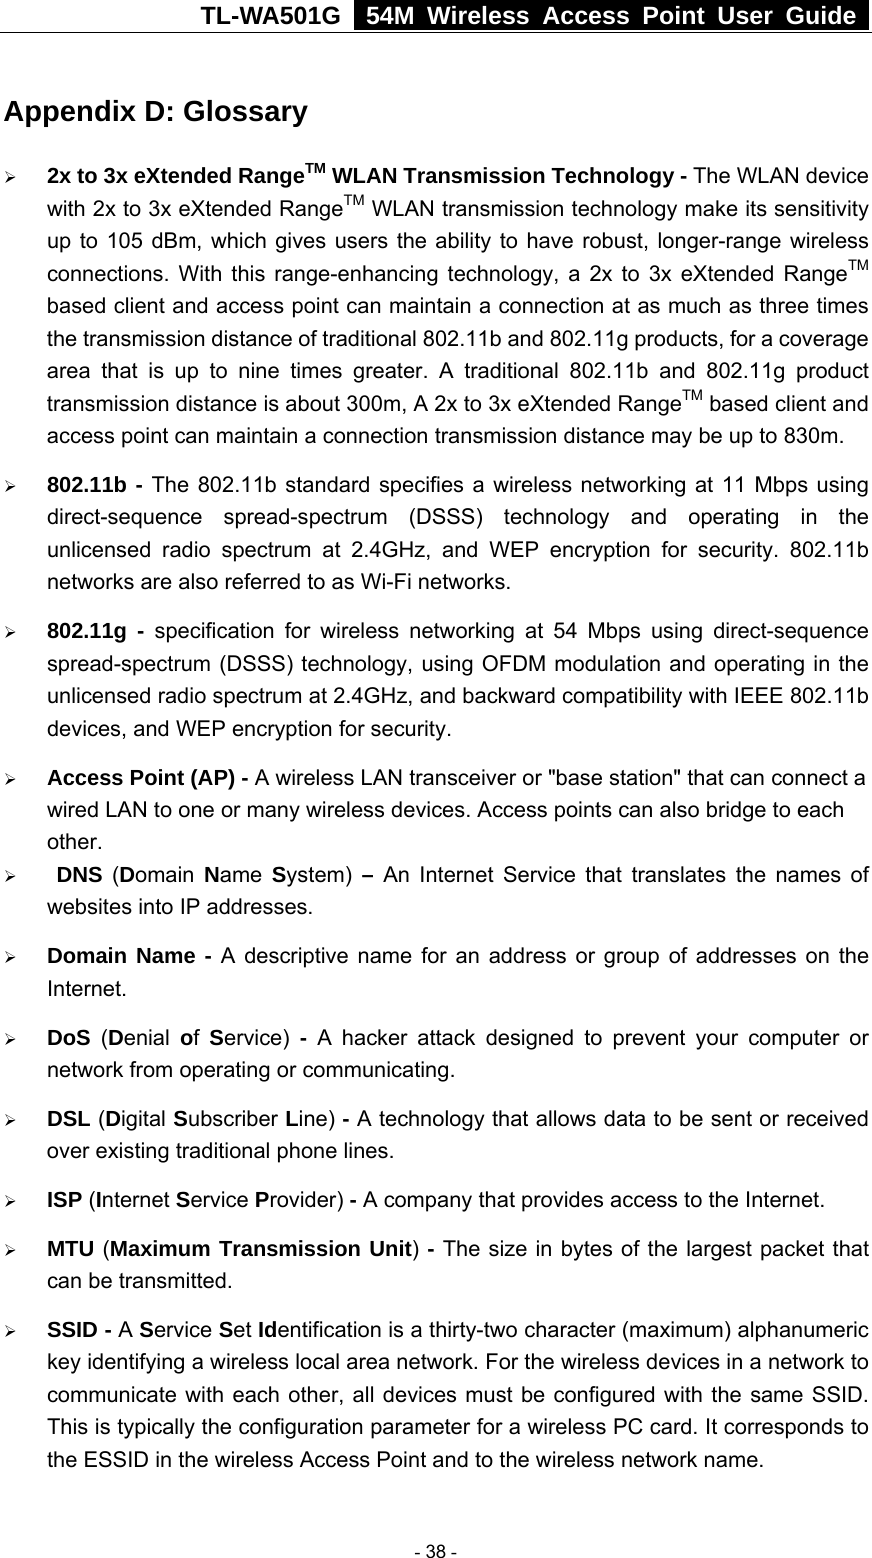 TL-WA501G   54M Wireless Access Point User Guide  Appendix D: Glossary ¾ 2x to 3x eXtended RangeTM WLAN Transmission Technology - The WLAN device with 2x to 3x eXtended RangeTM WLAN transmission technology make its sensitivity up to 105 dBm, which gives users the ability to have robust, longer-range wireless connections. With this range-enhancing technology, a 2x to 3x eXtended RangeTM based client and access point can maintain a connection at as much as three times the transmission distance of traditional 802.11b and 802.11g products, for a coverage area that is up to nine times greater. A traditional 802.11b and 802.11g product transmission distance is about 300m, A 2x to 3x eXtended RangeTM based client and access point can maintain a connection transmission distance may be up to 830m. ¾ 802.11b - The 802.11b standard specifies a wireless networking at 11 Mbps using direct-sequence spread-spectrum (DSSS) technology and operating in the unlicensed radio spectrum at 2.4GHz, and WEP encryption for security. 802.11b networks are also referred to as Wi-Fi networks. ¾ 802.11g - specification for wireless networking at 54 Mbps using direct-sequence spread-spectrum (DSSS) technology, using OFDM modulation and operating in the unlicensed radio spectrum at 2.4GHz, and backward compatibility with IEEE 802.11b devices, and WEP encryption for security. ¾ Access Point (AP) - A wireless LAN transceiver or &quot;base station&quot; that can connect a wired LAN to one or many wireless devices. Access points can also bridge to each other. ¾  DNS (Domain  Name  System) – An Internet Service that translates the names of websites into IP addresses. ¾ Domain Name - A descriptive name for an address or group of addresses on the Internet.  ¾ DoS (Denial  of  Service) - A hacker attack designed to prevent your computer or network from operating or communicating. ¾ DSL (Digital Subscriber Line) - A technology that allows data to be sent or received over existing traditional phone lines. ¾ ISP (Internet Service Provider) - A company that provides access to the Internet. ¾ MTU (Maximum Transmission Unit)  - The size in bytes of the largest packet that can be transmitted. ¾ SSID - A Service Set Identification is a thirty-two character (maximum) alphanumeric key identifying a wireless local area network. For the wireless devices in a network to communicate with each other, all devices must be configured with the same SSID. This is typically the configuration parameter for a wireless PC card. It corresponds to the ESSID in the wireless Access Point and to the wireless network name.    - 38 - 